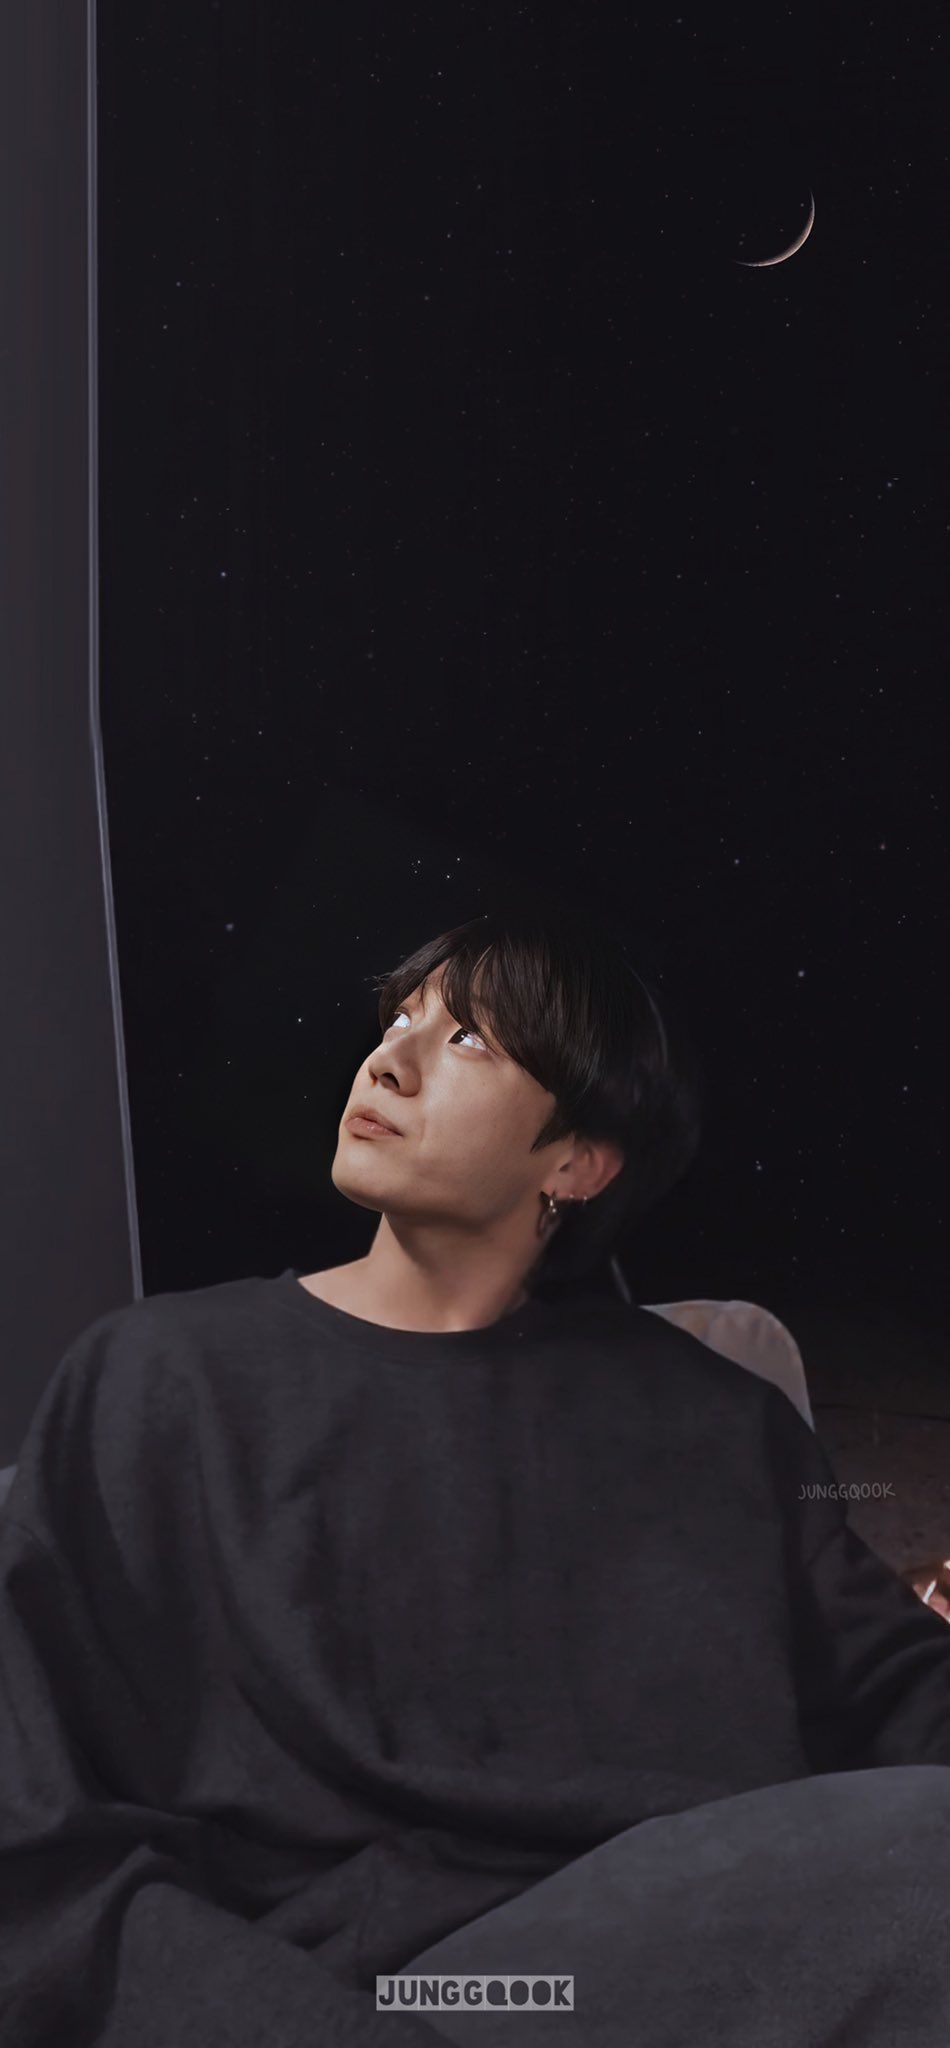 A man sitting on the couch looking at his phone - Jungkook